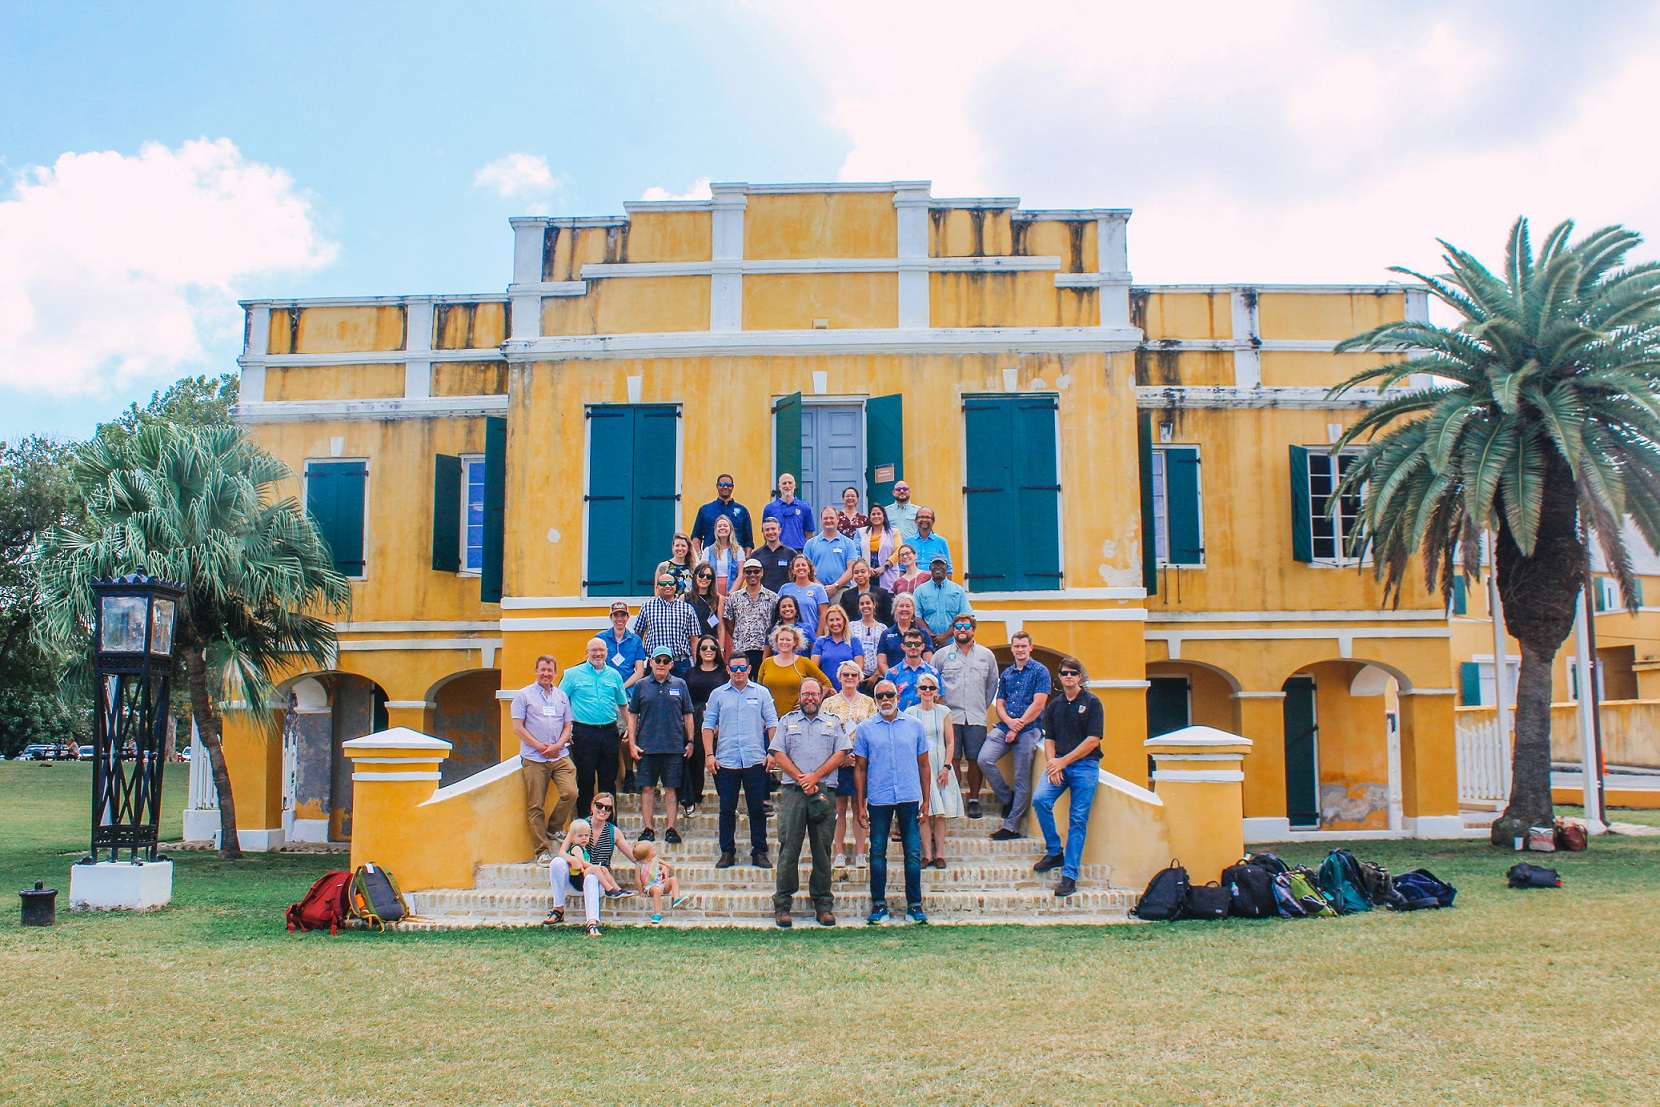 Group photo of meeting attendees standing on the front steps of a weathered yellow and white building.